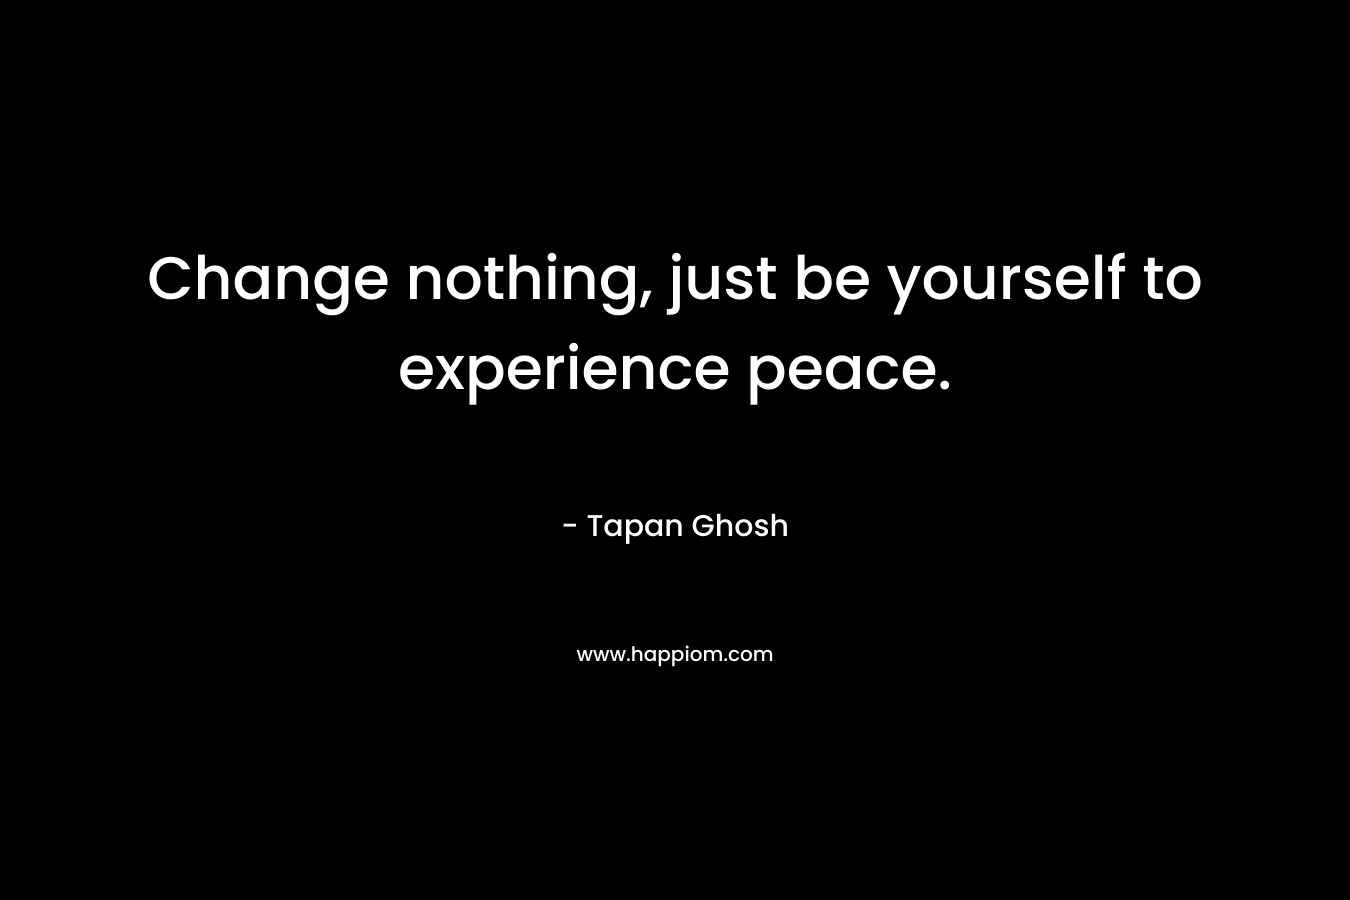 Change nothing, just be yourself to experience peace.